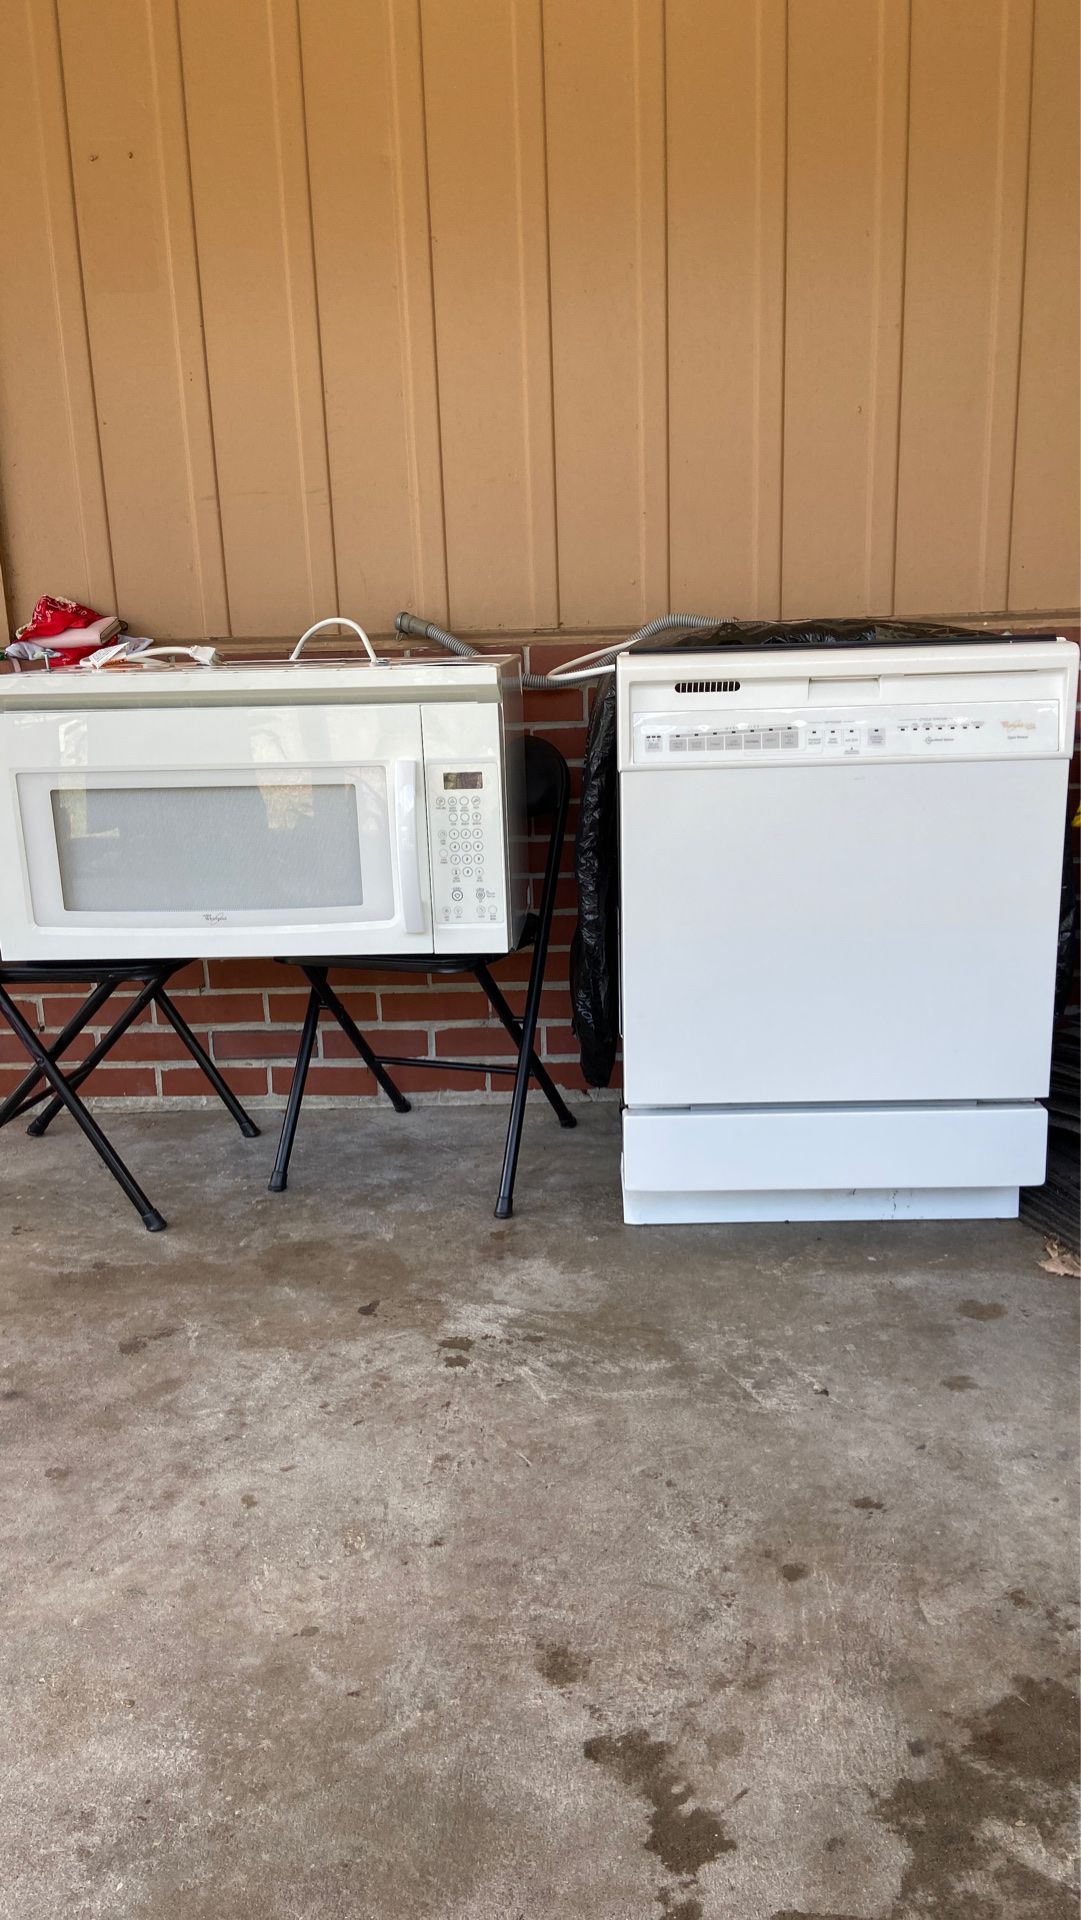 Microwave and dishwasher